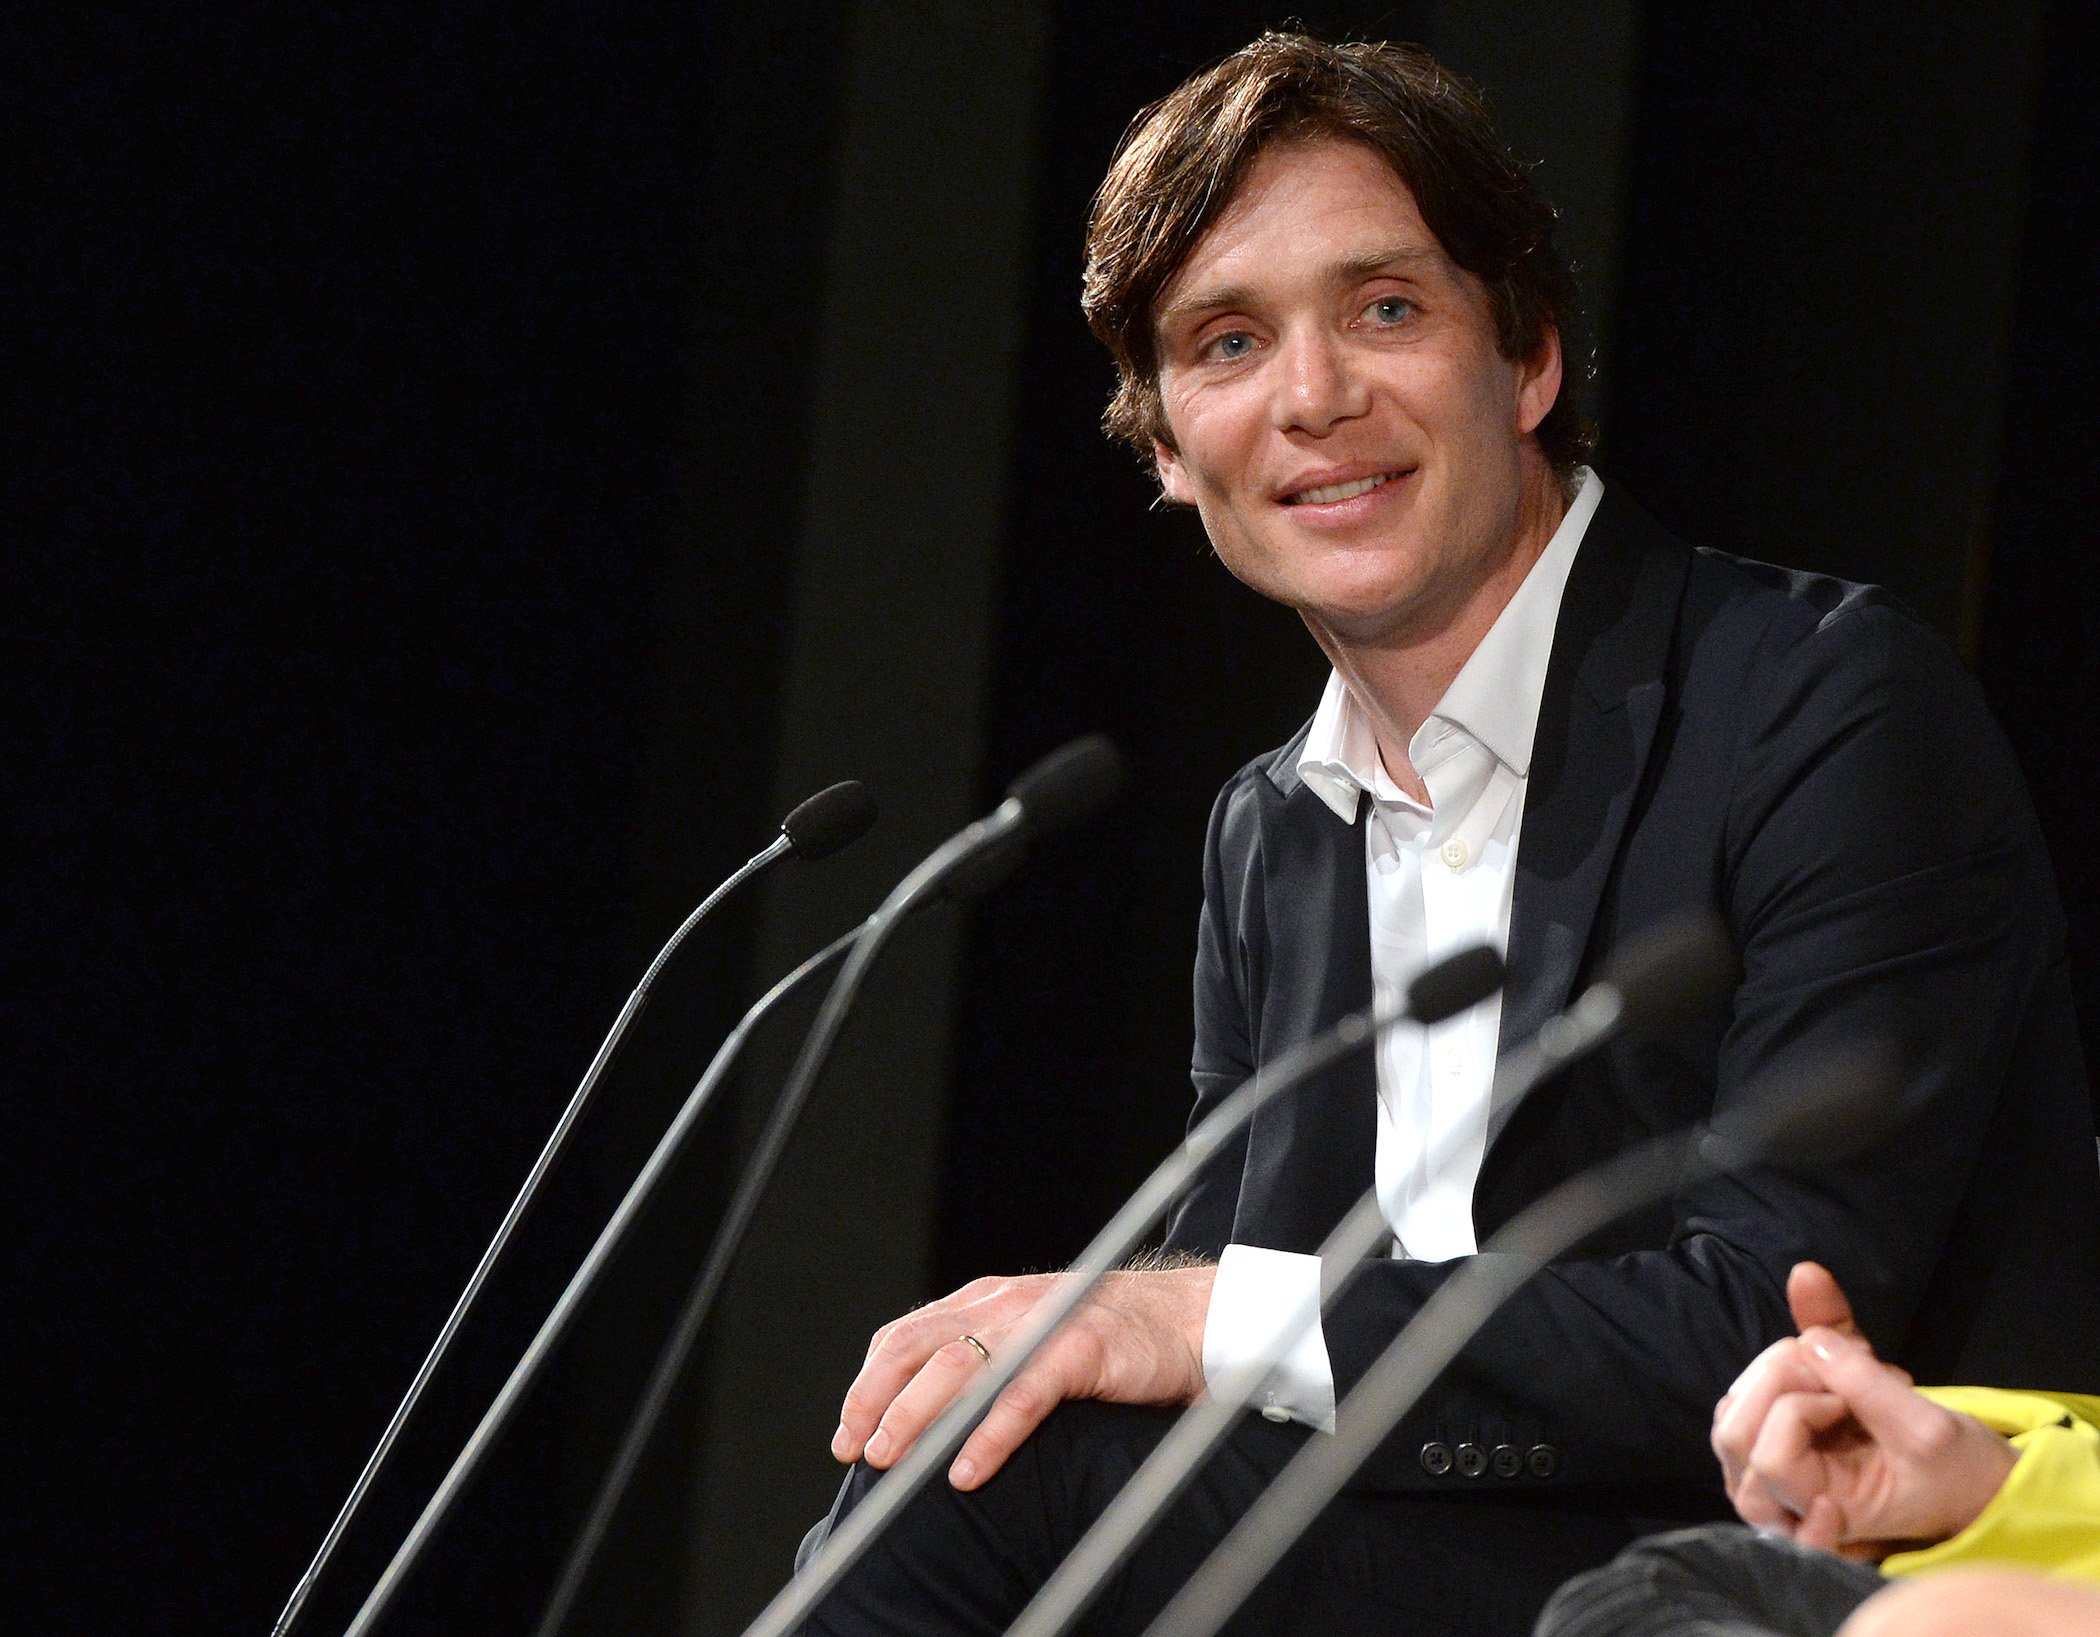 Cillian Murphy smiling against a black backdrop at a 'Peaky Blinders' Q&A. Cillian Murphy plays Thomas Shelby in 'Peaky Blinders' Season 6